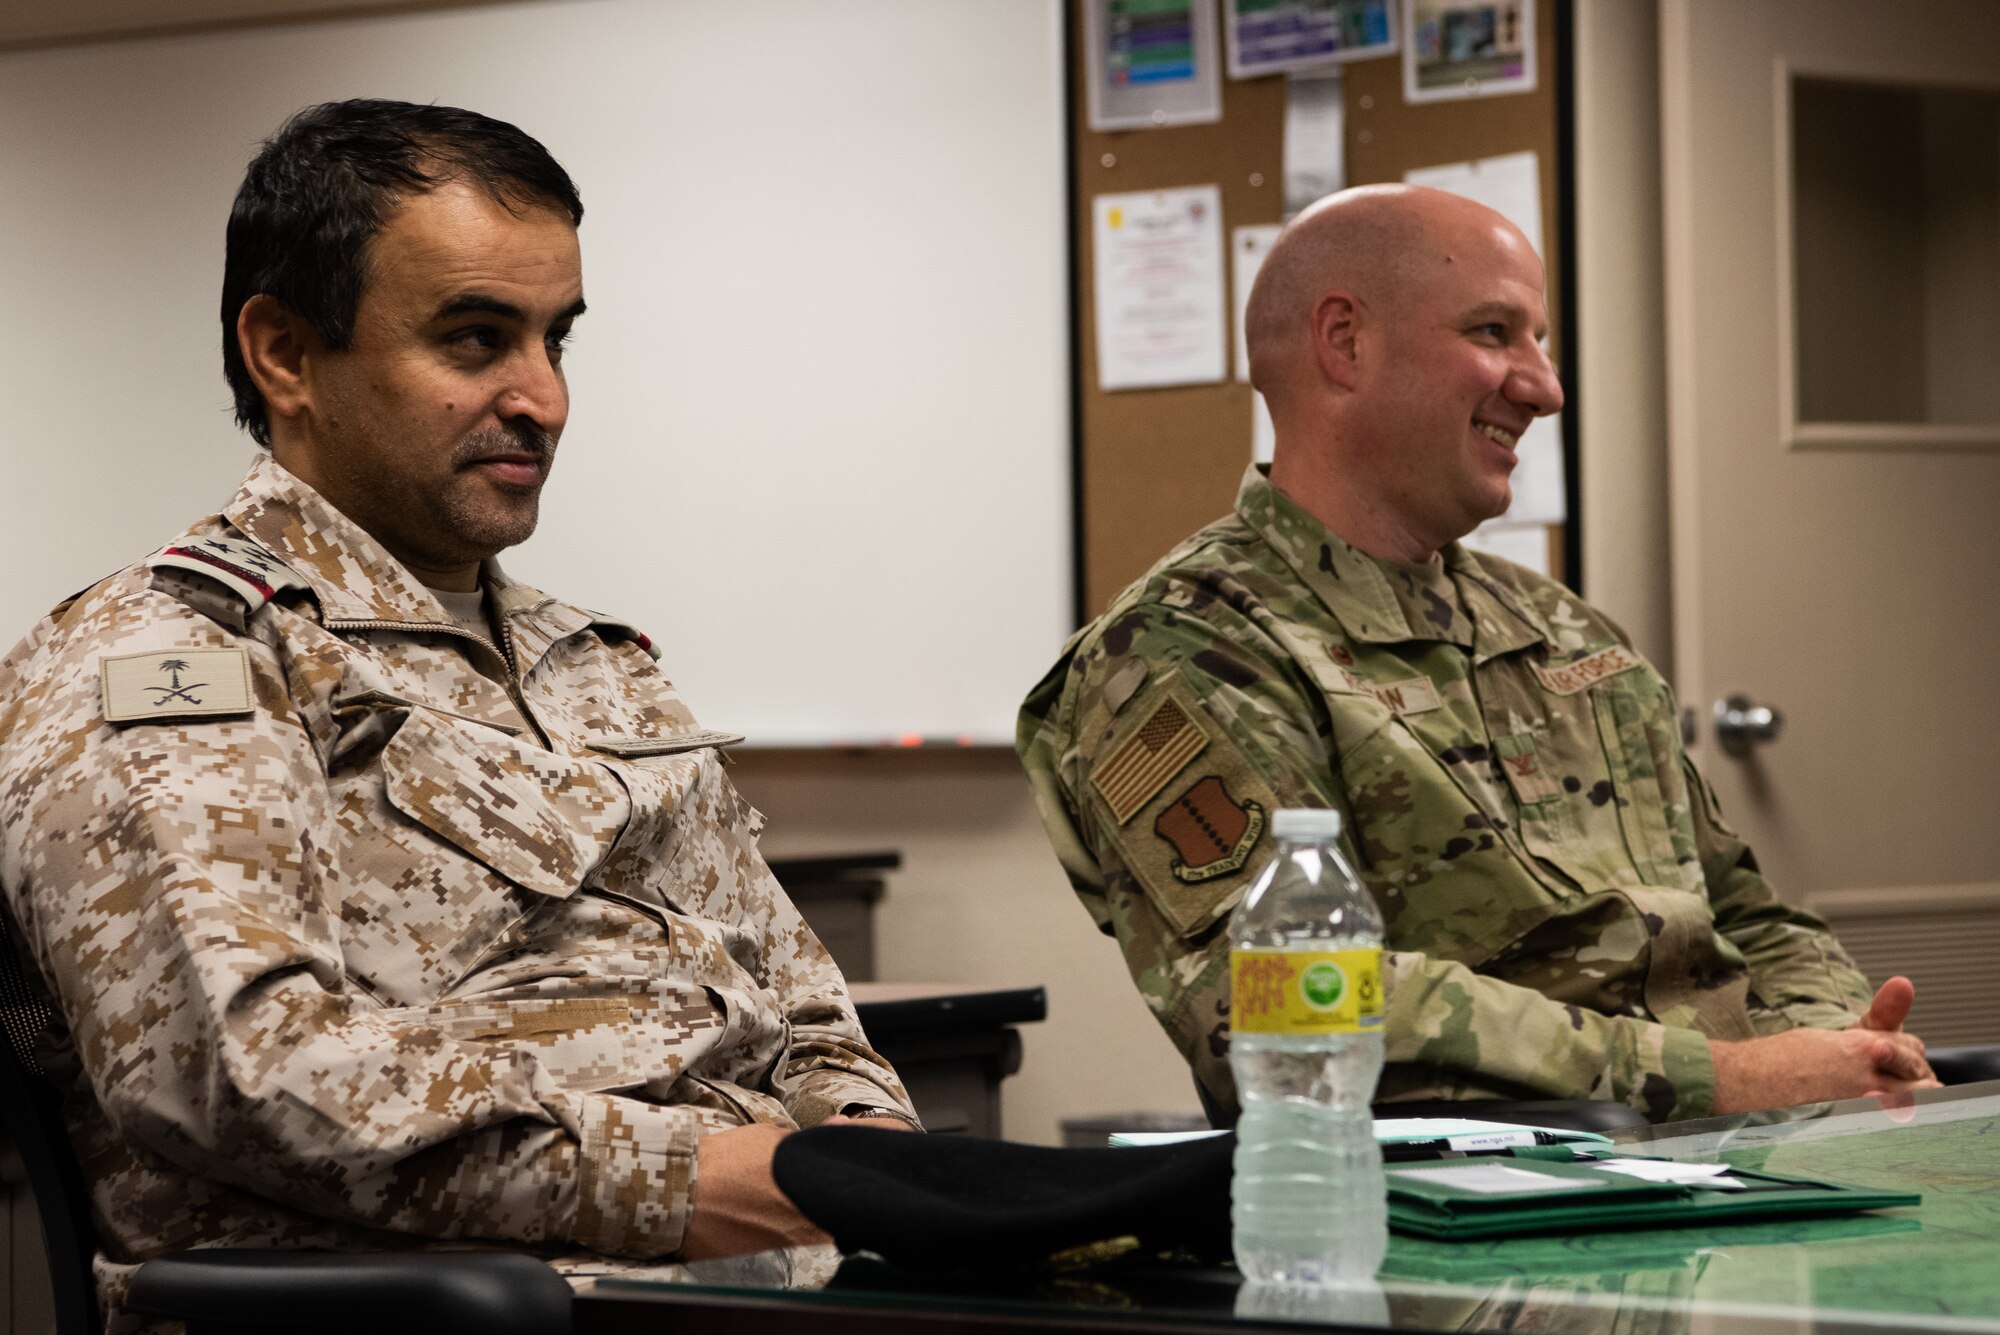 Royal Saudi Air Forces Commodore Al Mutairi Sattam Thaib, Armed Forces Intel and Security Institute commander, and U.S. Air Force Col. Matthew Reilman, 17th Training Wing commander, receive a briefing on international officer training at Goodfellow Air Force Base, May 18, 2022. Members of the RSAF visited Goodfellow AFB to learn about the joint and coalition forces intelligence, surveillance, and reconnaissance training provided by the 17th TRW.  (U.S. Air Force Photo by Senior Airman Michael Bowman)